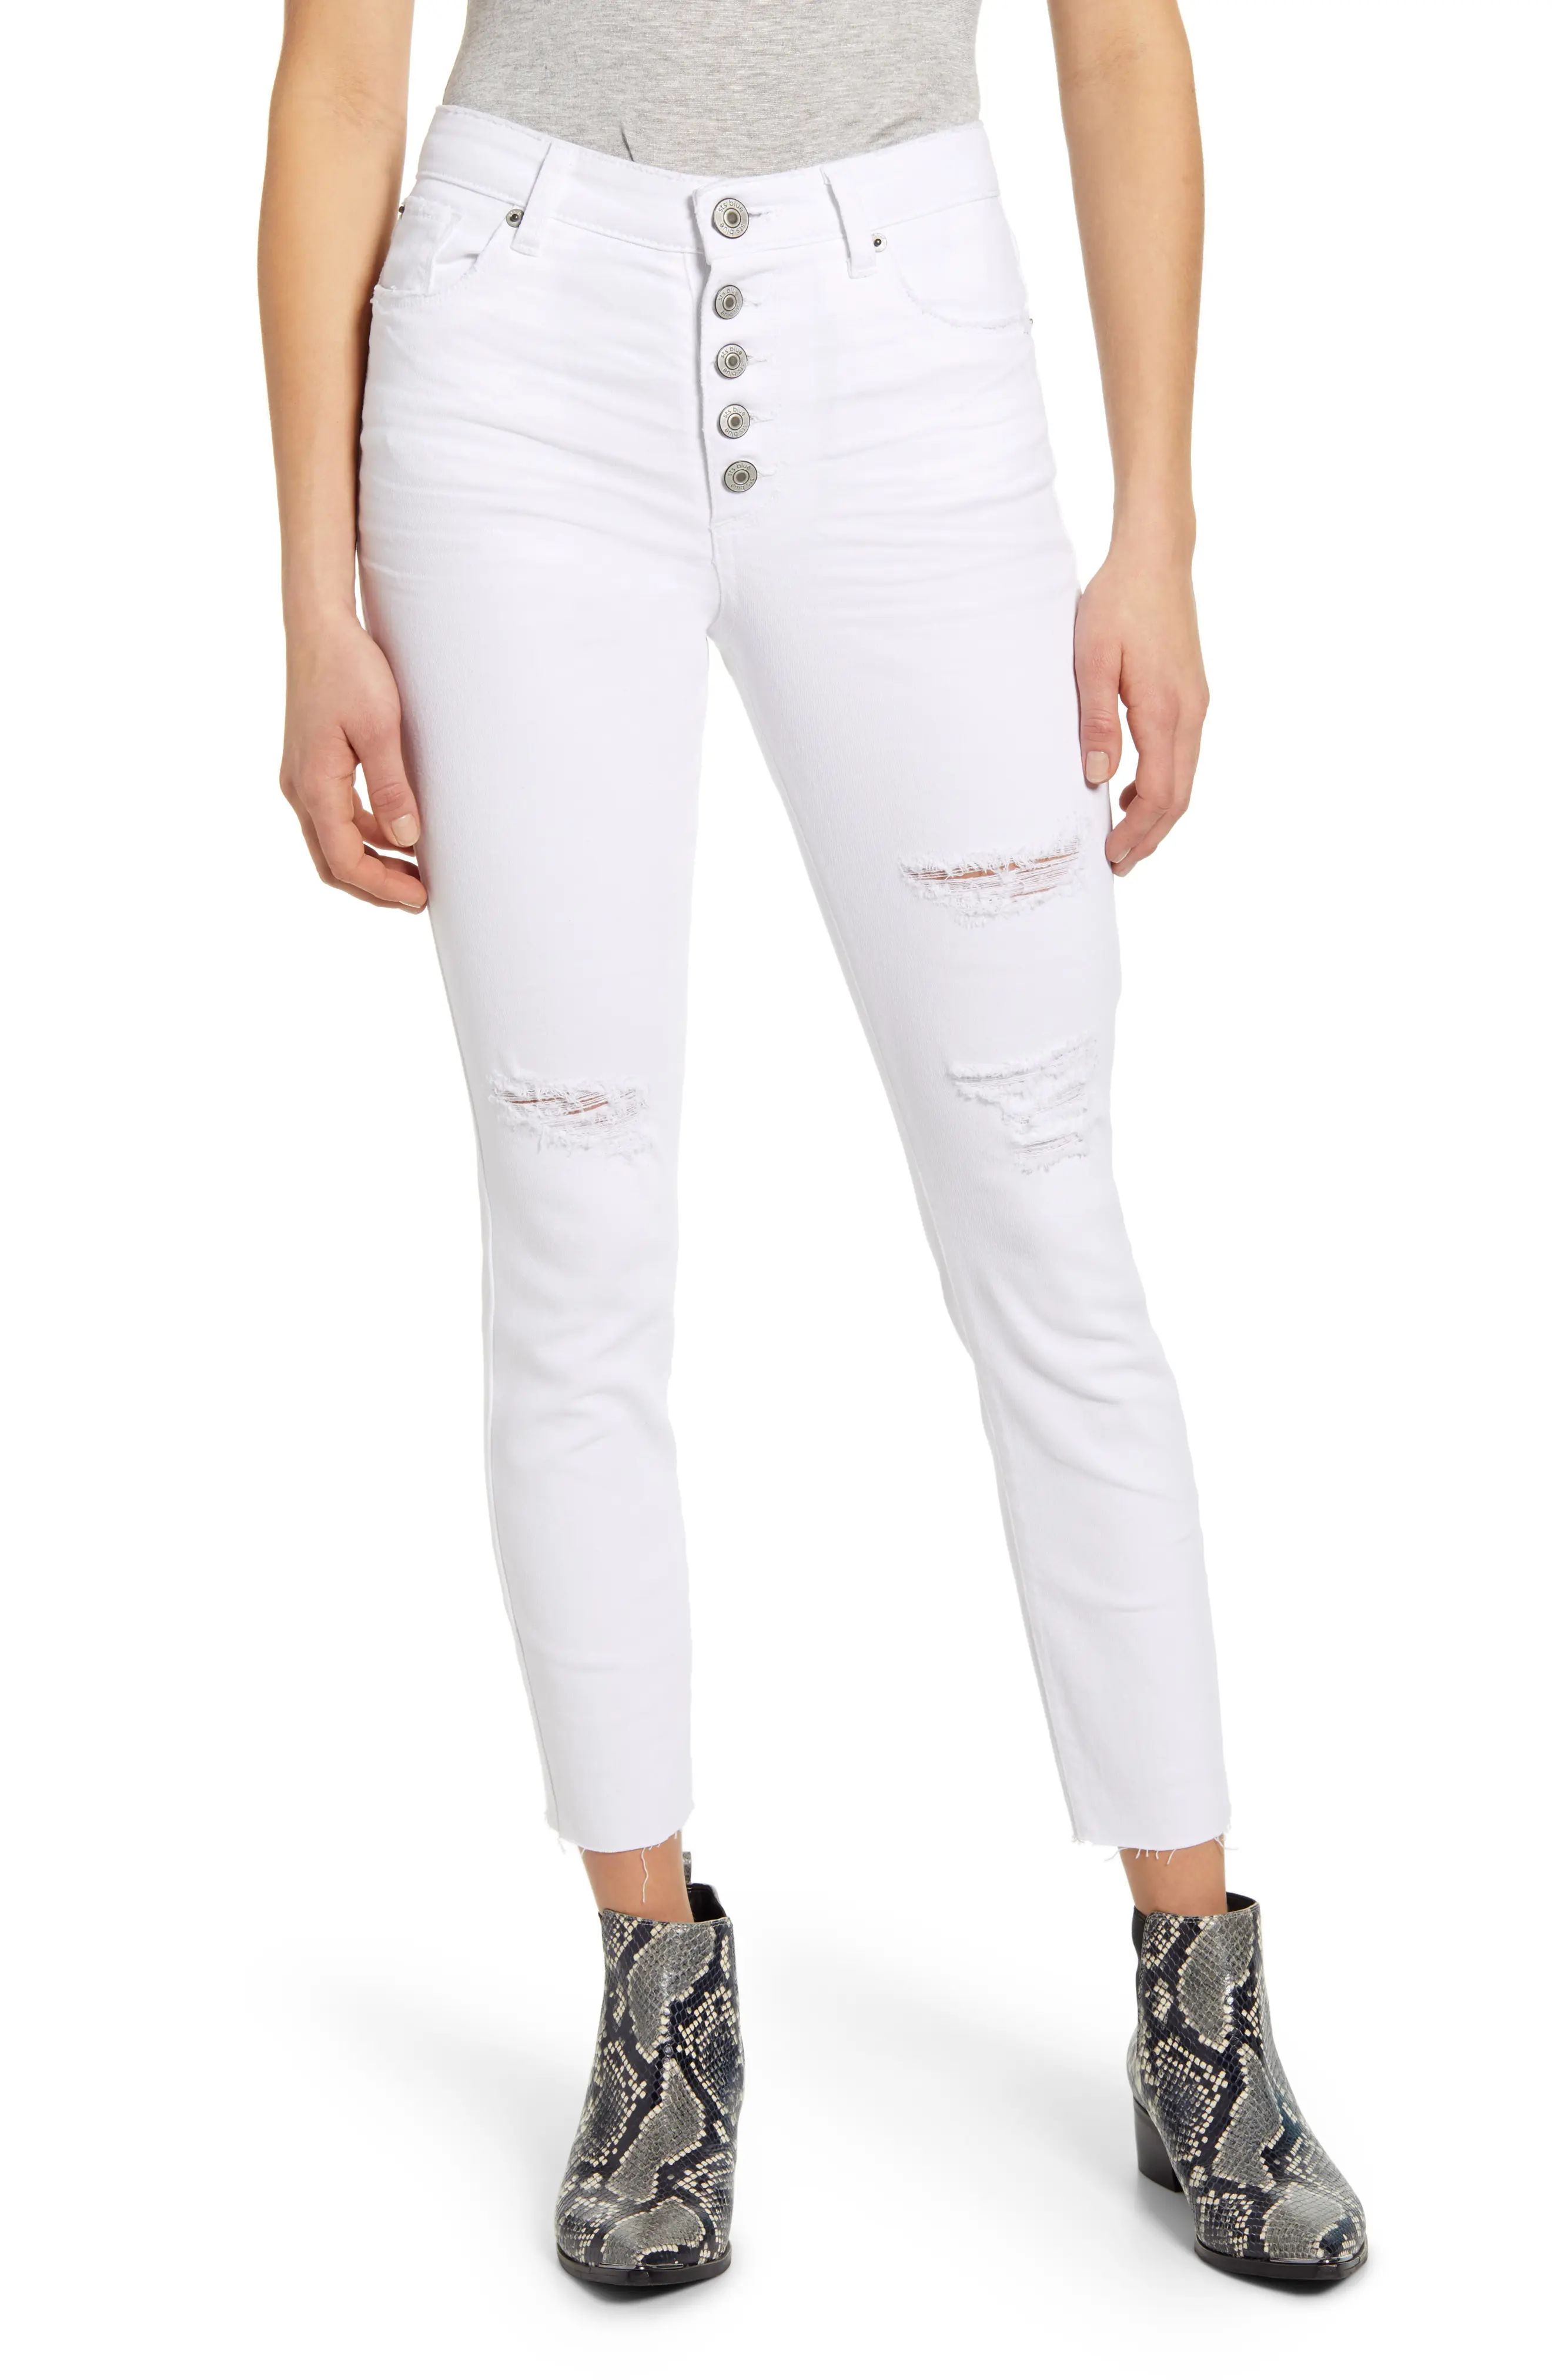 Women's Sts Blue Ellie Distressed Crop Skinny Jeans, Size 27 - White | Nordstrom